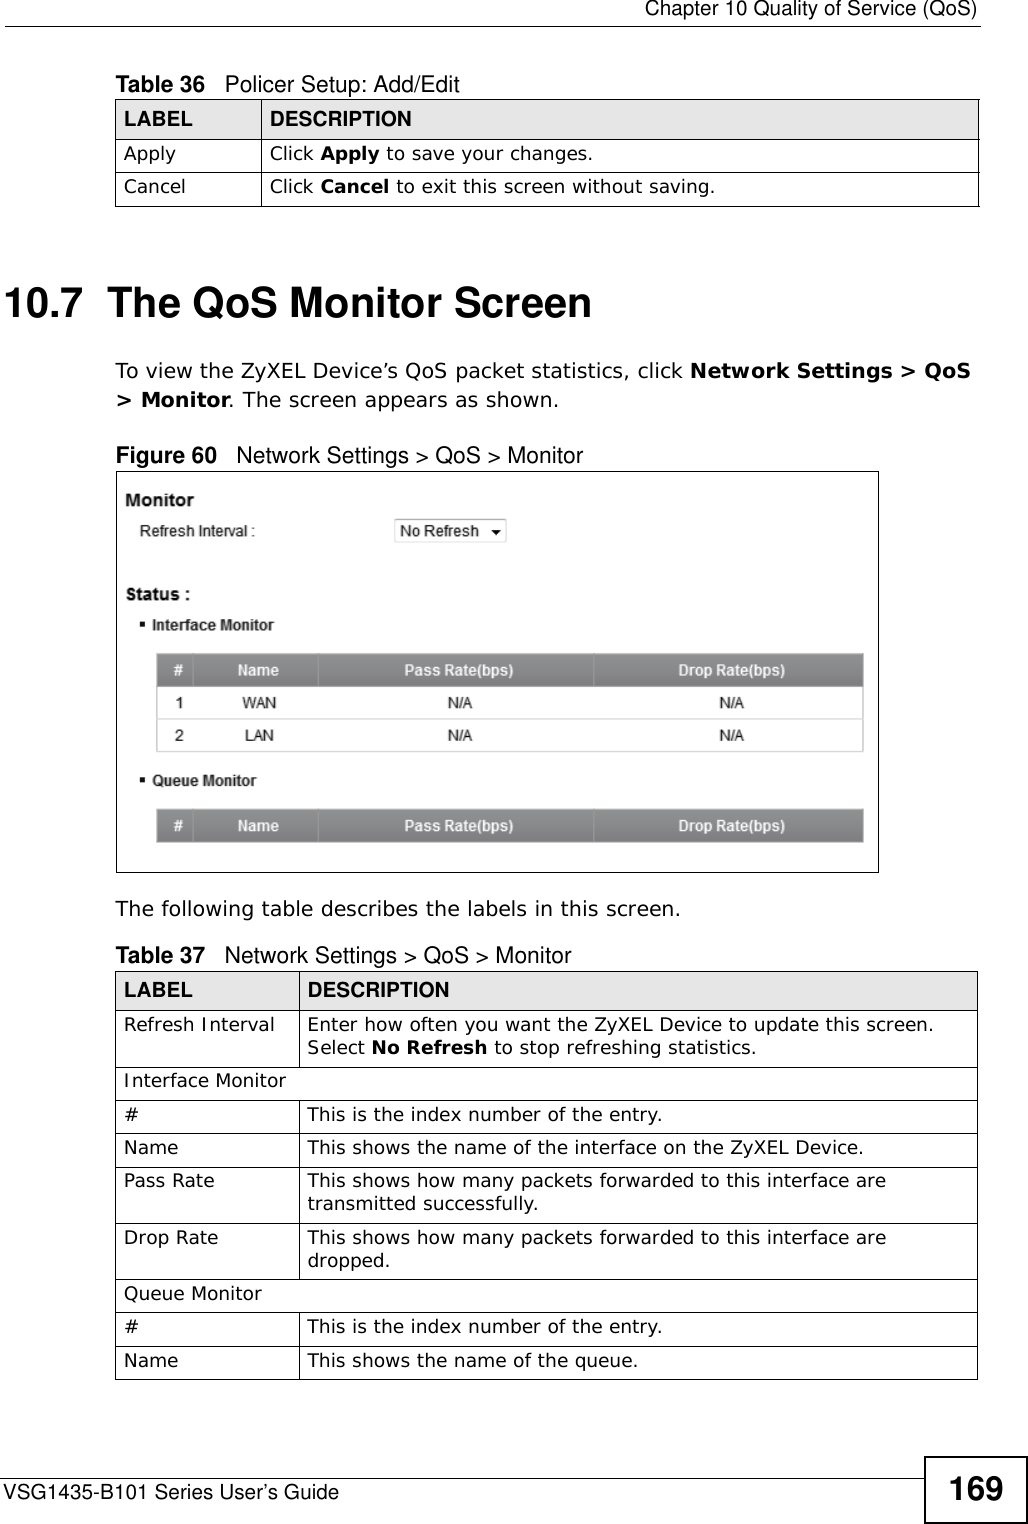  Chapter 10 Quality of Service (QoS)VSG1435-B101 Series User’s Guide 16910.7  The QoS Monitor Screen To view the ZyXEL Device’s QoS packet statistics, click Network Settings &gt; QoS &gt; Monitor. The screen appears as shown. Figure 60   Network Settings &gt; QoS &gt; Monitor The following table describes the labels in this screen.  Apply Click Apply to save your changes.Cancel Click Cancel to exit this screen without saving.Table 36   Policer Setup: Add/EditLABEL DESCRIPTIONTable 37   Network Settings &gt; QoS &gt; MonitorLABEL DESCRIPTIONRefresh Interval Enter how often you want the ZyXEL Device to update this screen. Select No Refresh to stop refreshing statistics.Interface Monitor# This is the index number of the entry.Name This shows the name of the interface on the ZyXEL Device. Pass Rate This shows how many packets forwarded to this interface are transmitted successfully.Drop Rate This shows how many packets forwarded to this interface are dropped.Queue Monitor# This is the index number of the entry.Name This shows the name of the queue. 